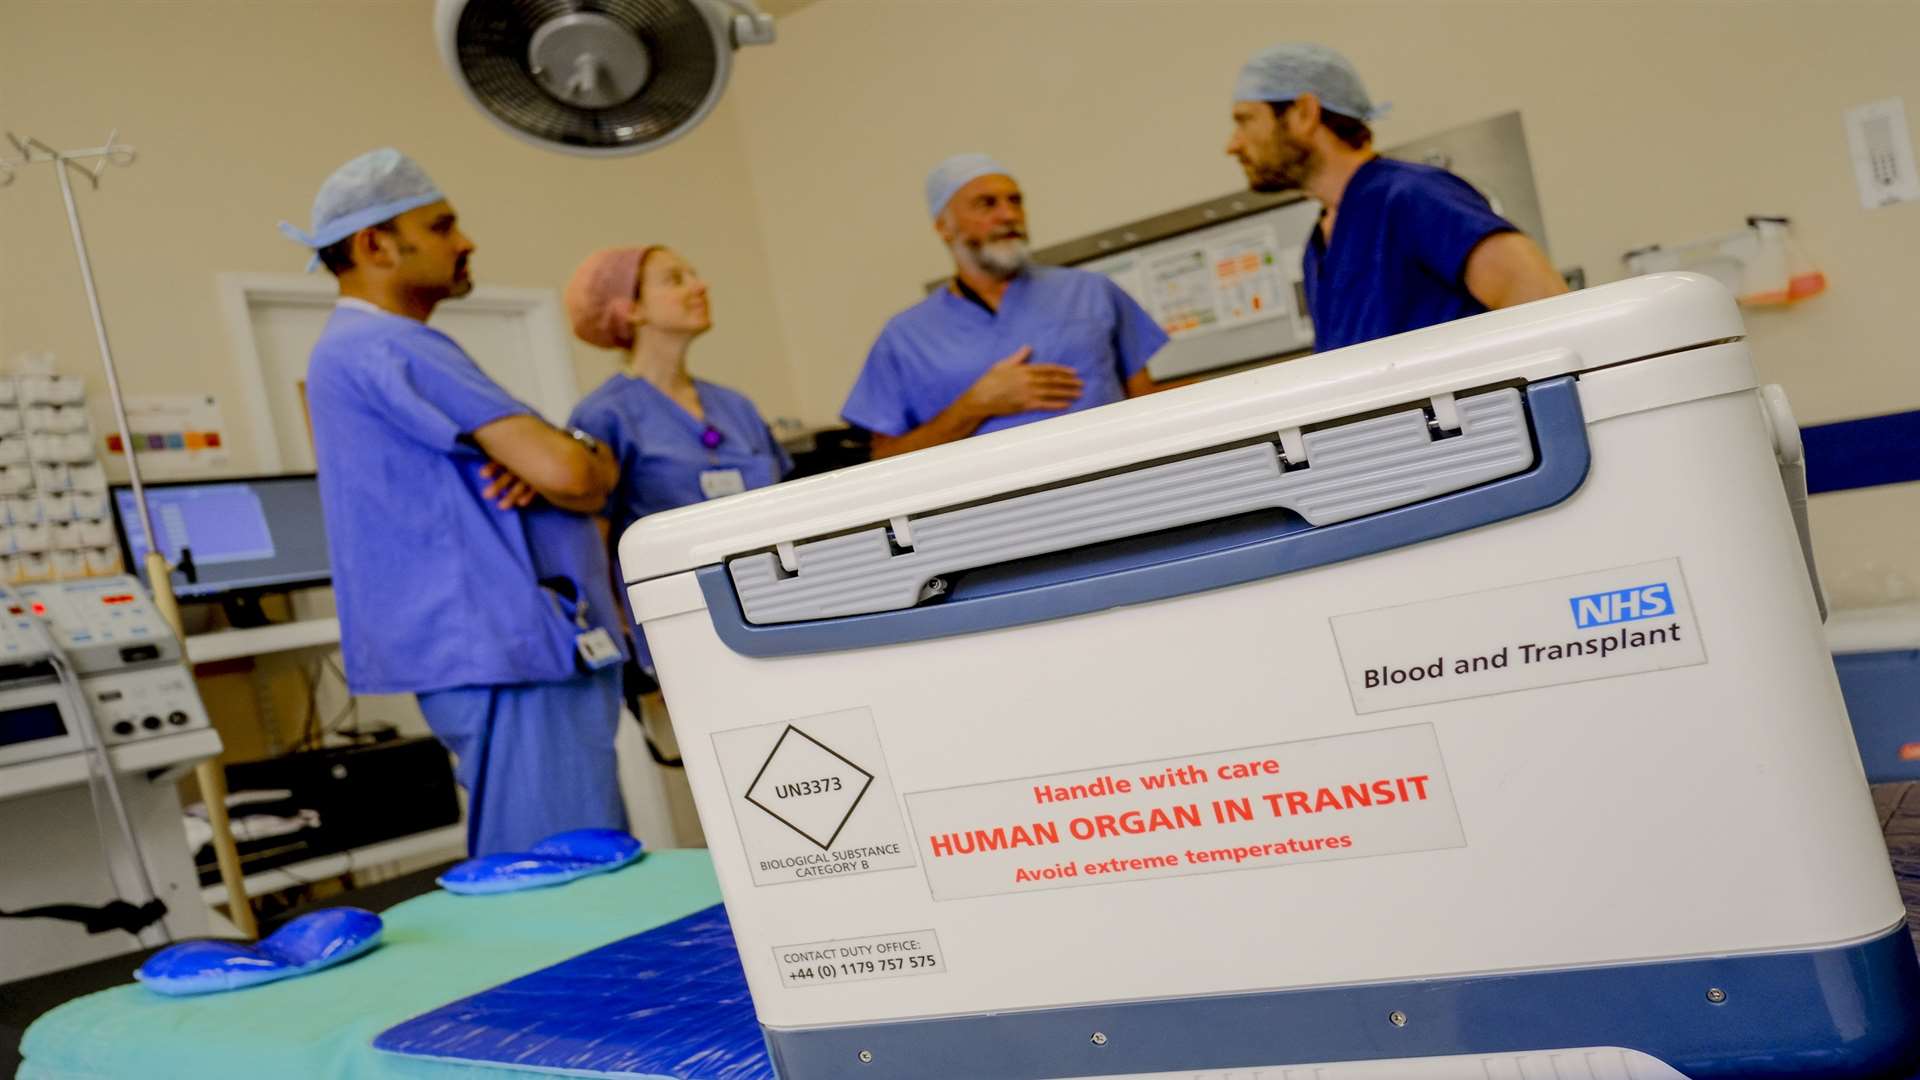 REVEALED: More than 130 people have died in the last 10 years while waiting for an organ transplant